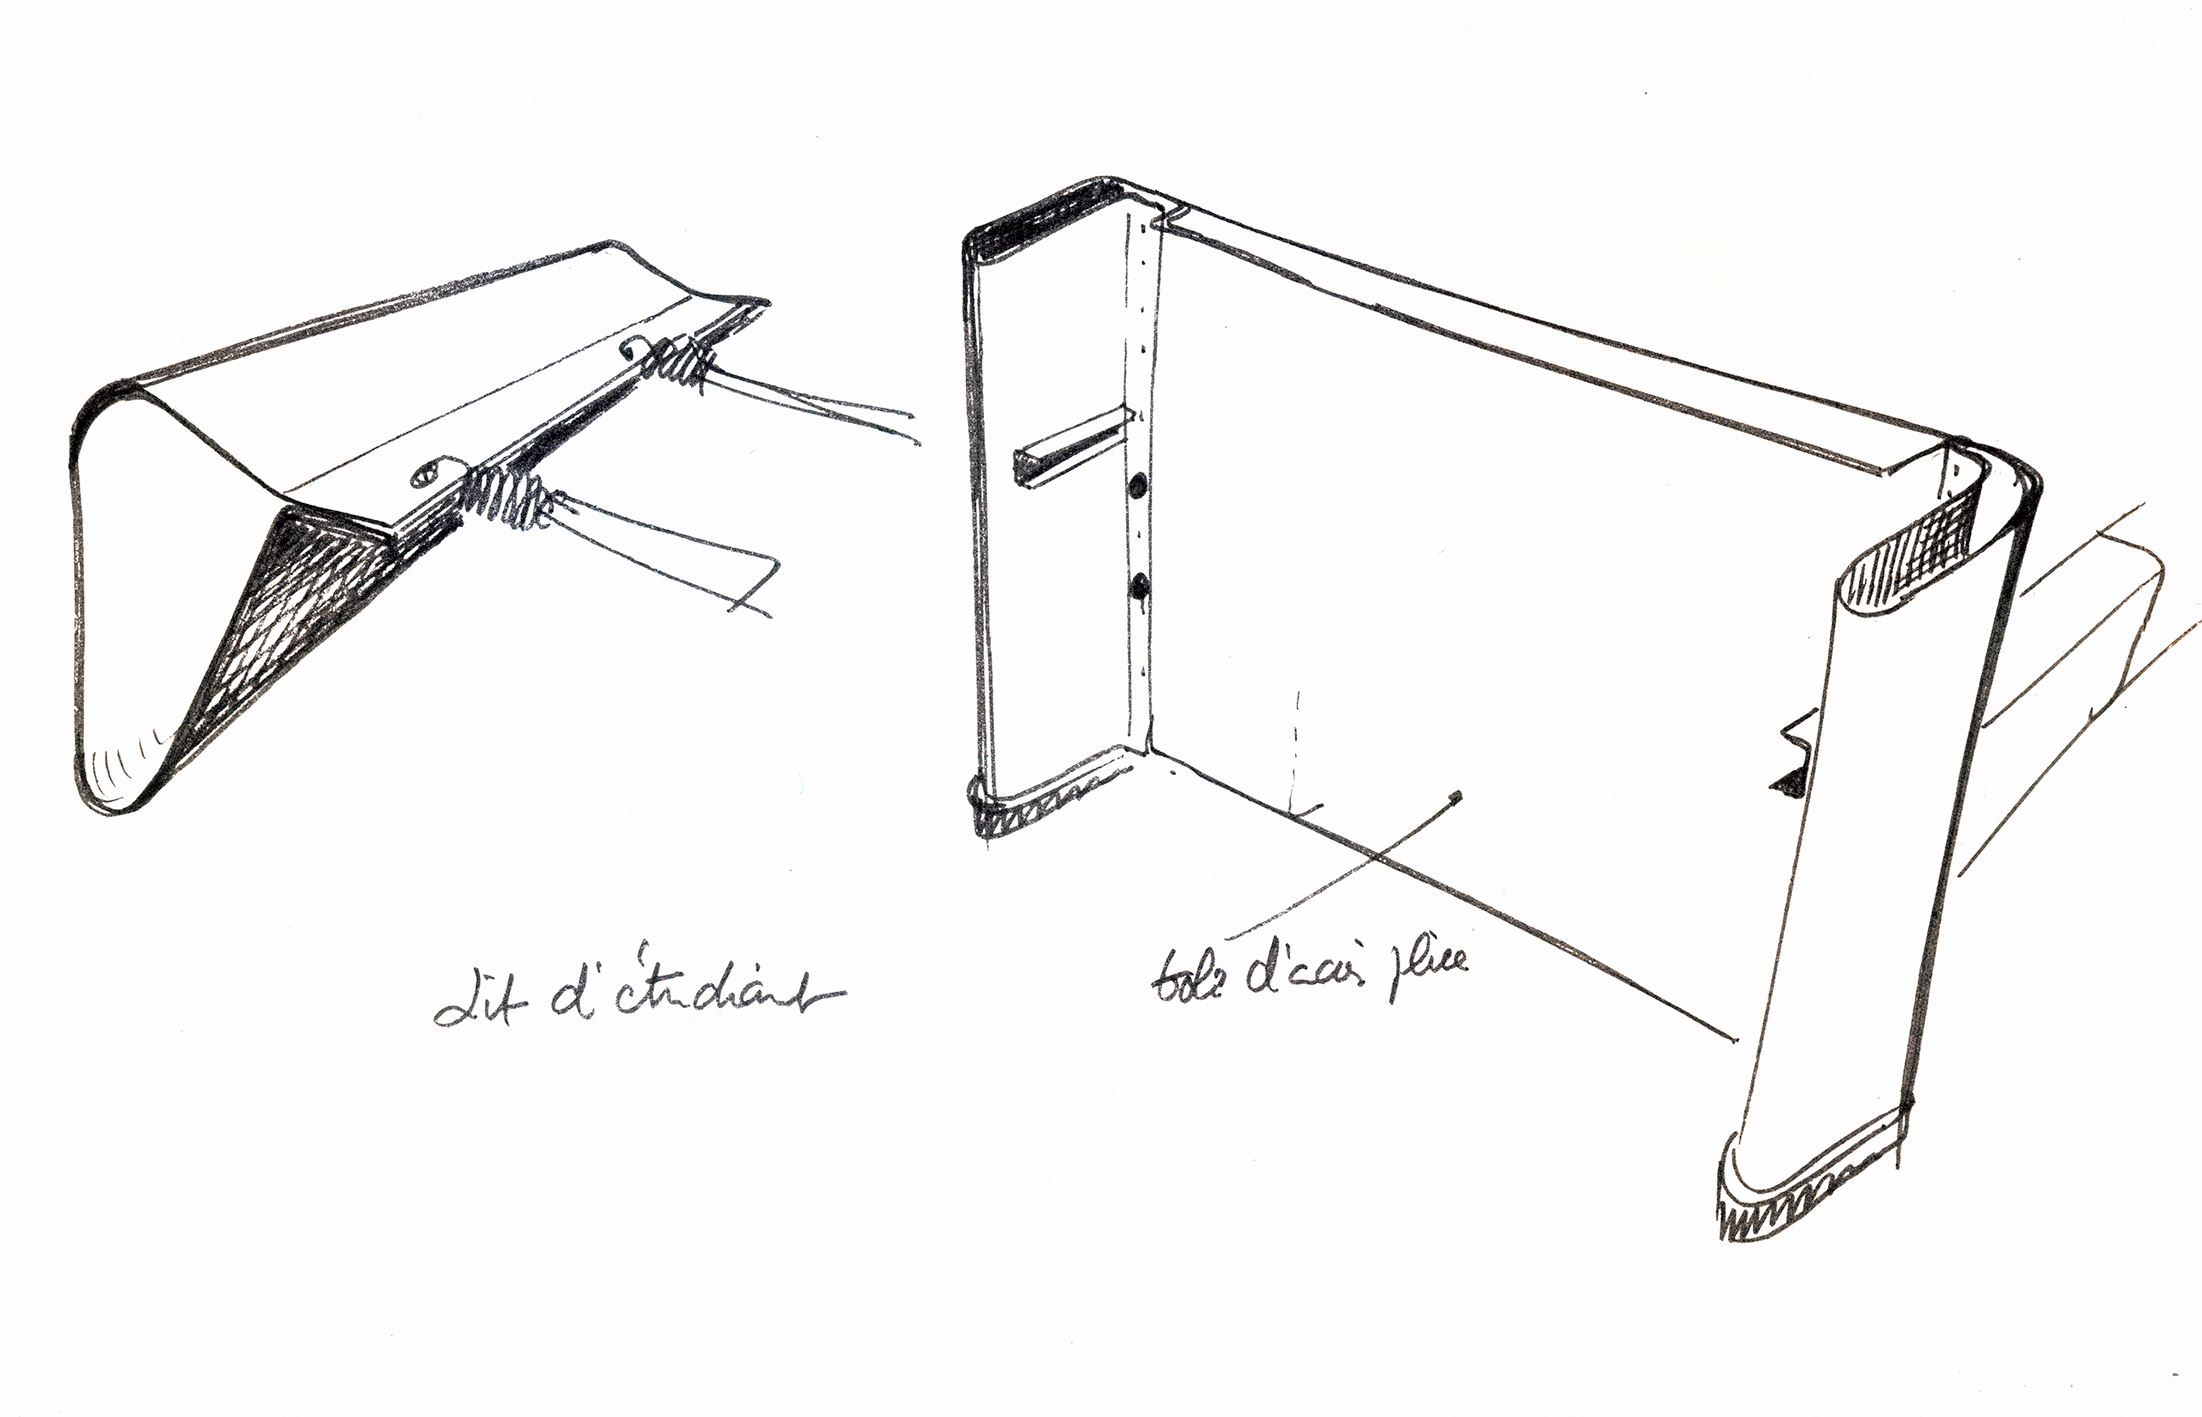 “Lit d’étudiant” (Student bed). Detail of the runner and bent steel box frame. Sketch by Jean Prouvé for the magazine <i>Intérieur,</i> 1965.